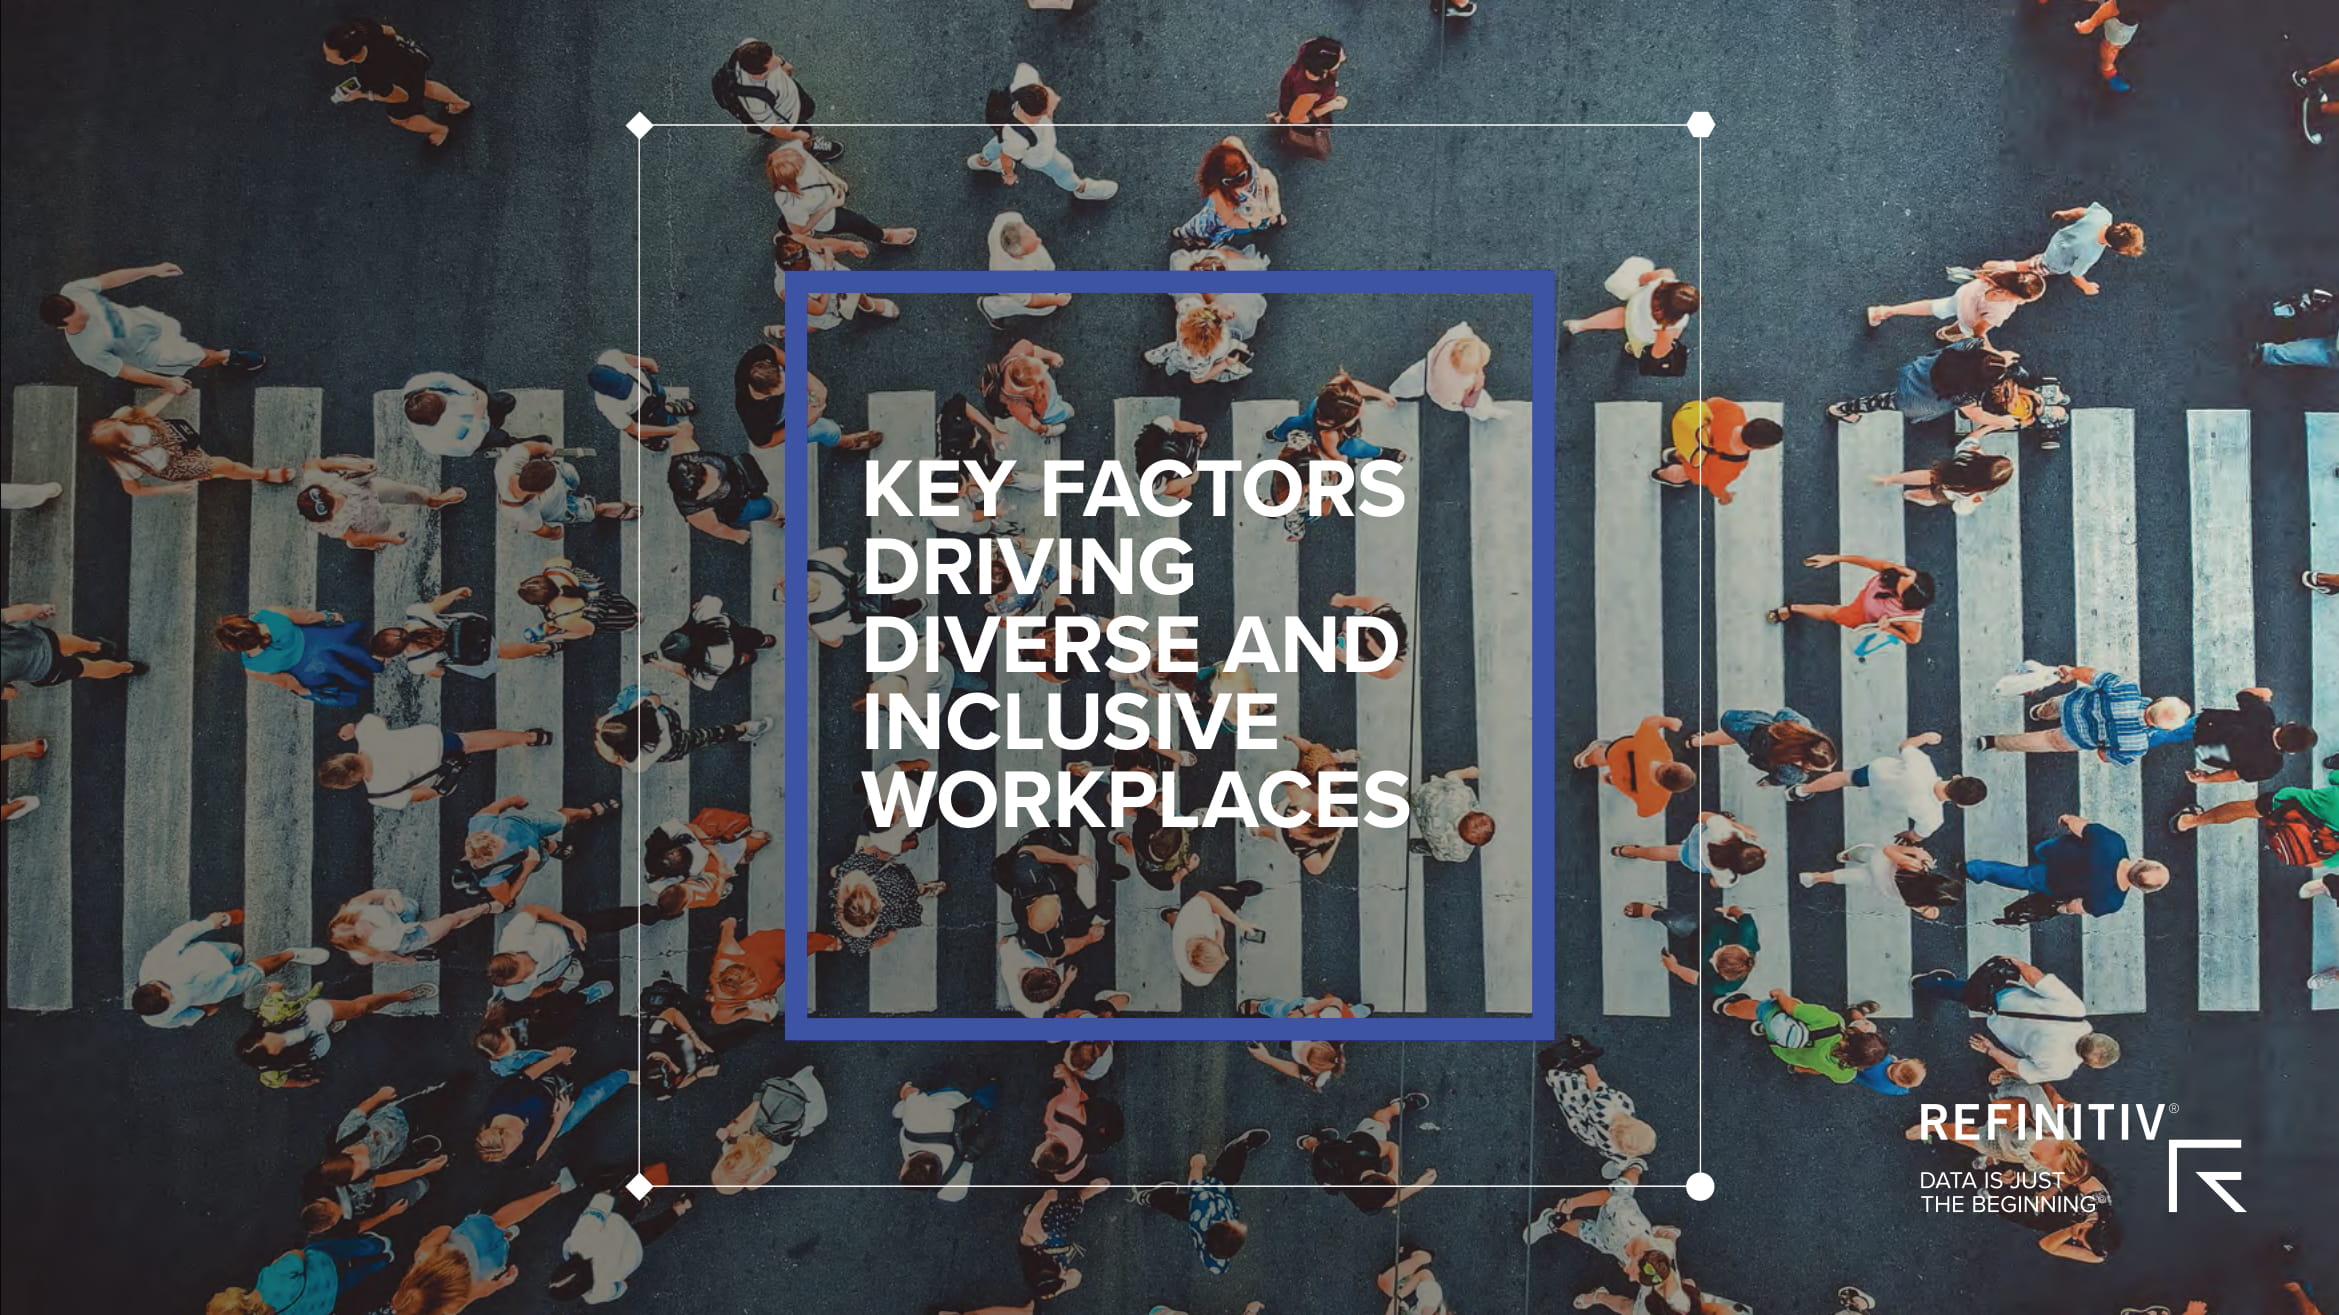 Key factors driving diverse and inclusive workplaces 01